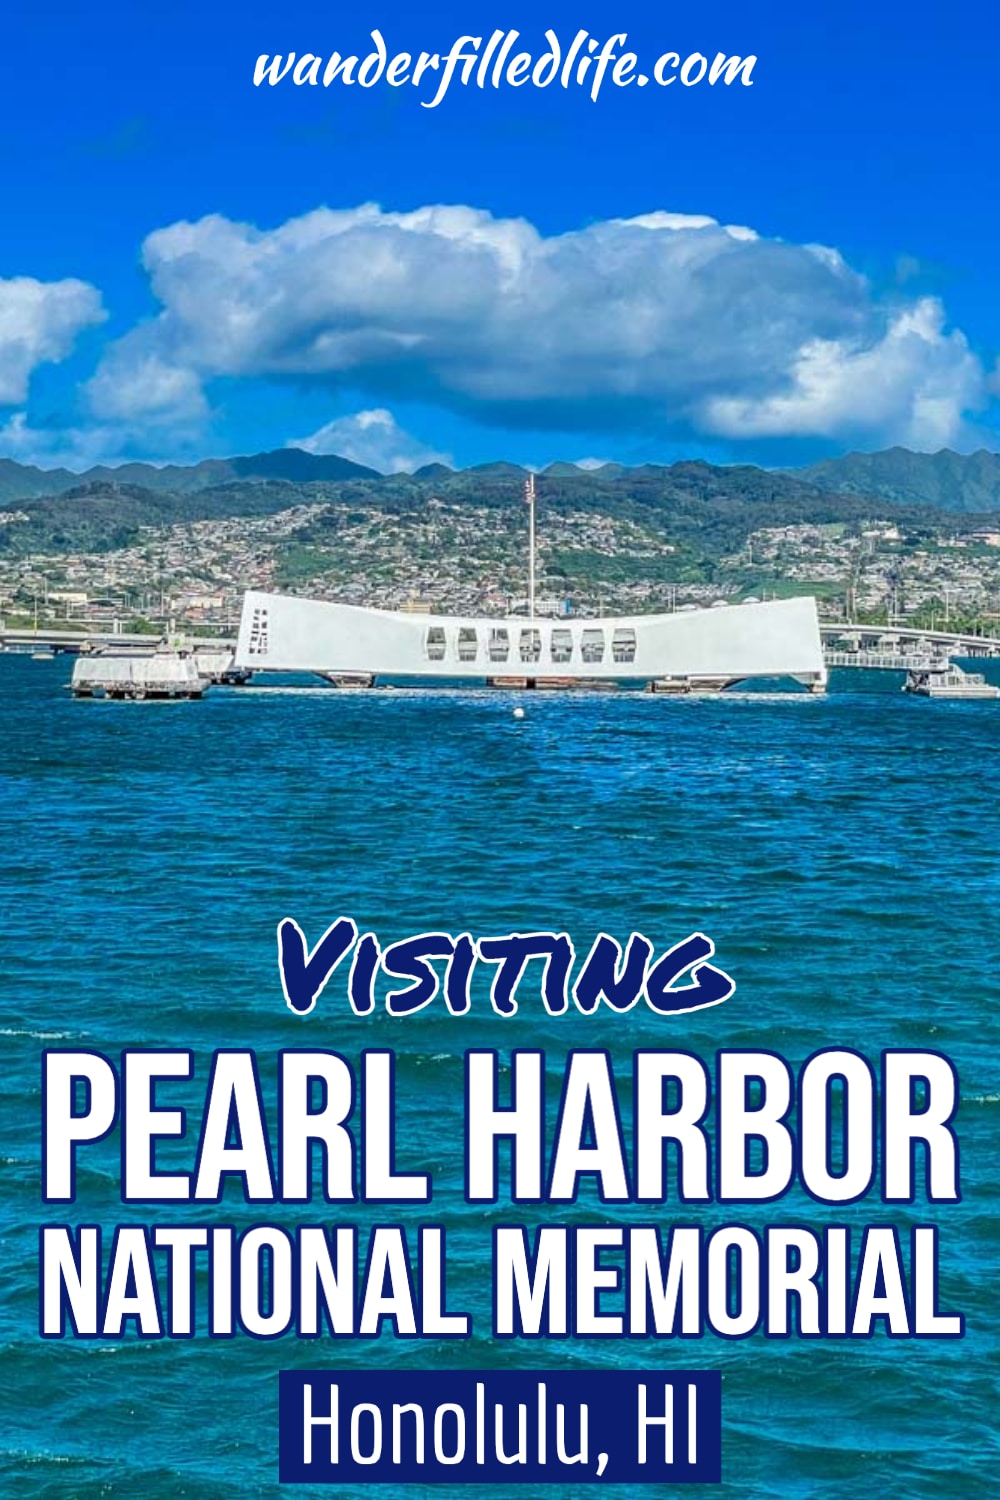 Visiting Pearl Harbor National Memorial is truly an experience not to be missed but it does take a little planning to do right.